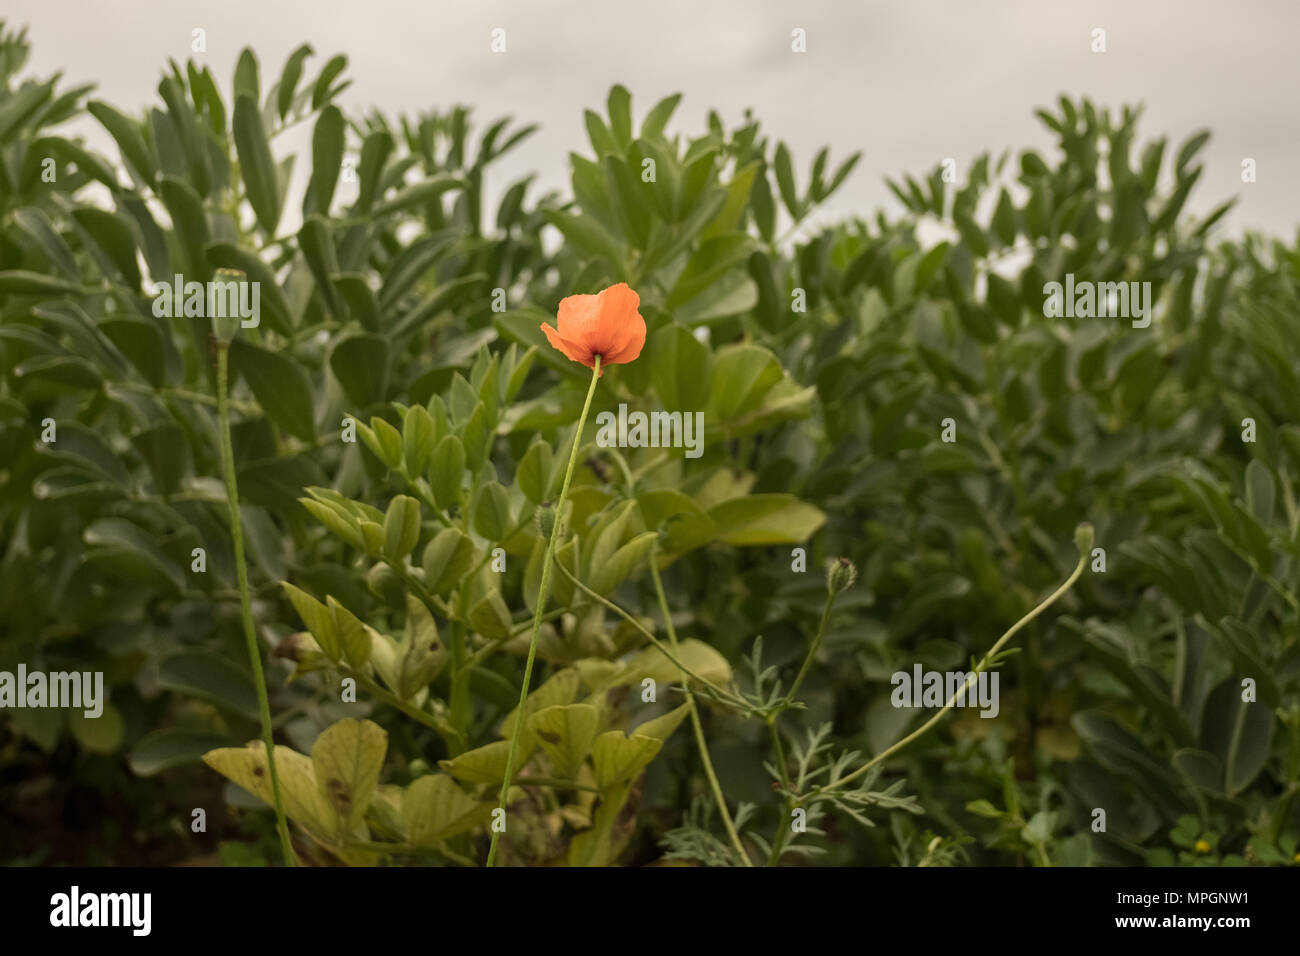 Poppy flower and broad bean plants in the background Stock Photo